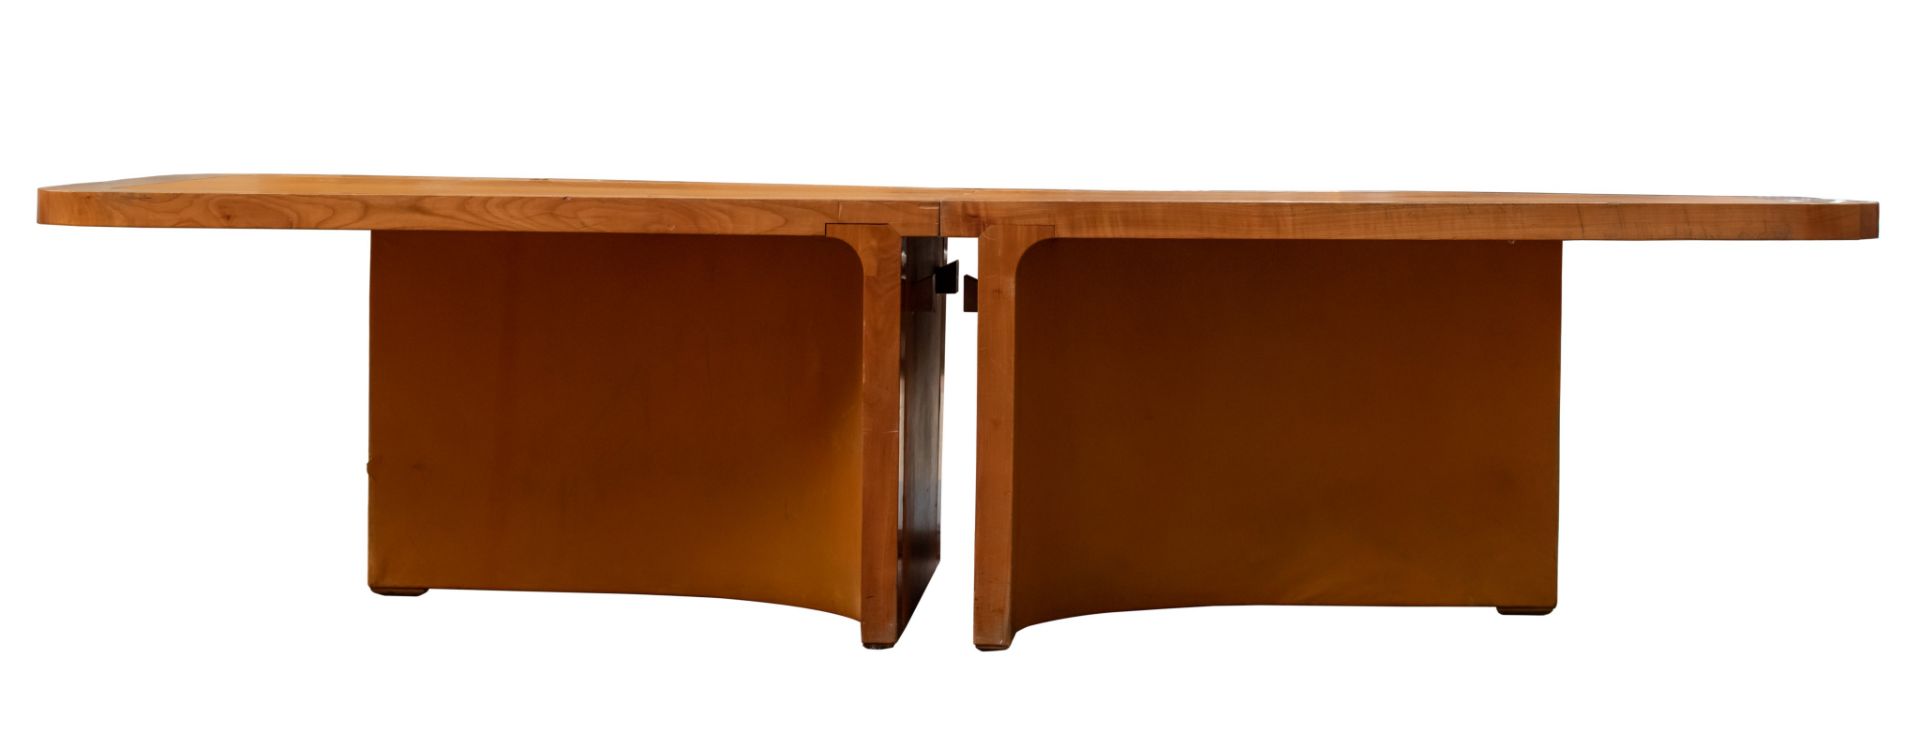 A large office desk with leather top, cherry wood, H 71 - W 300 - 427 - D 120 cm